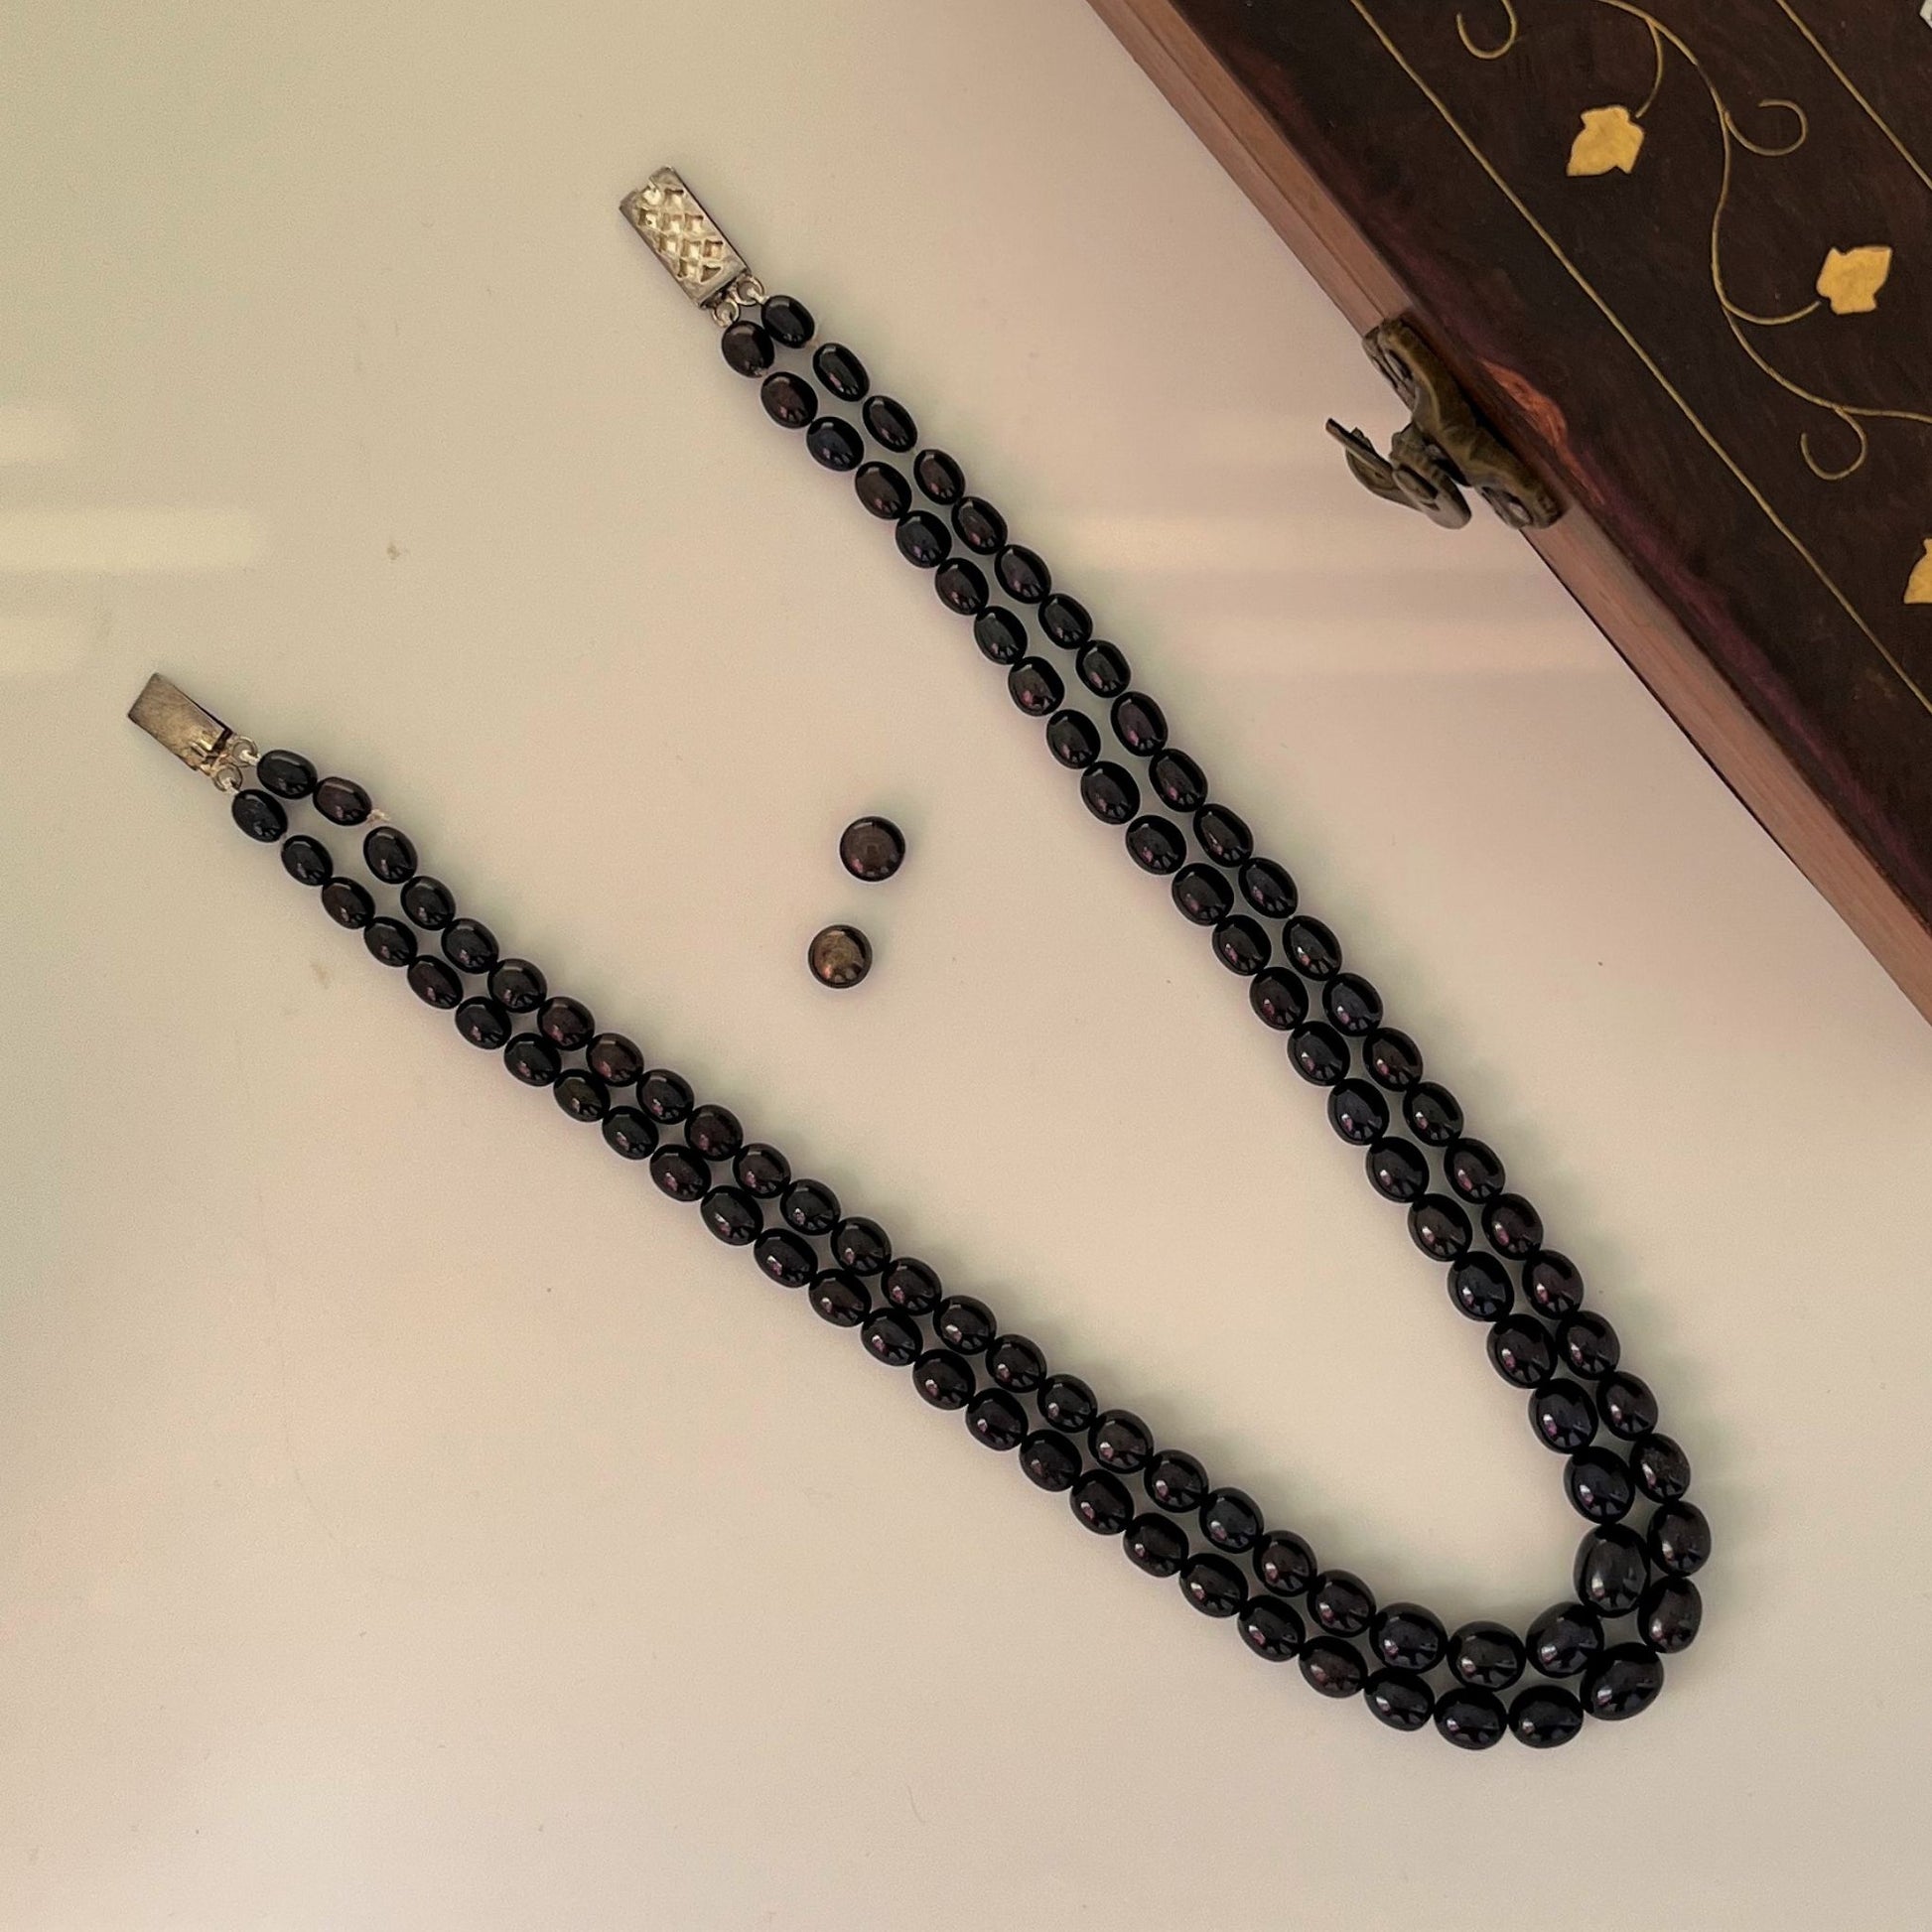 2 layer Graded Black Pearl Necklace